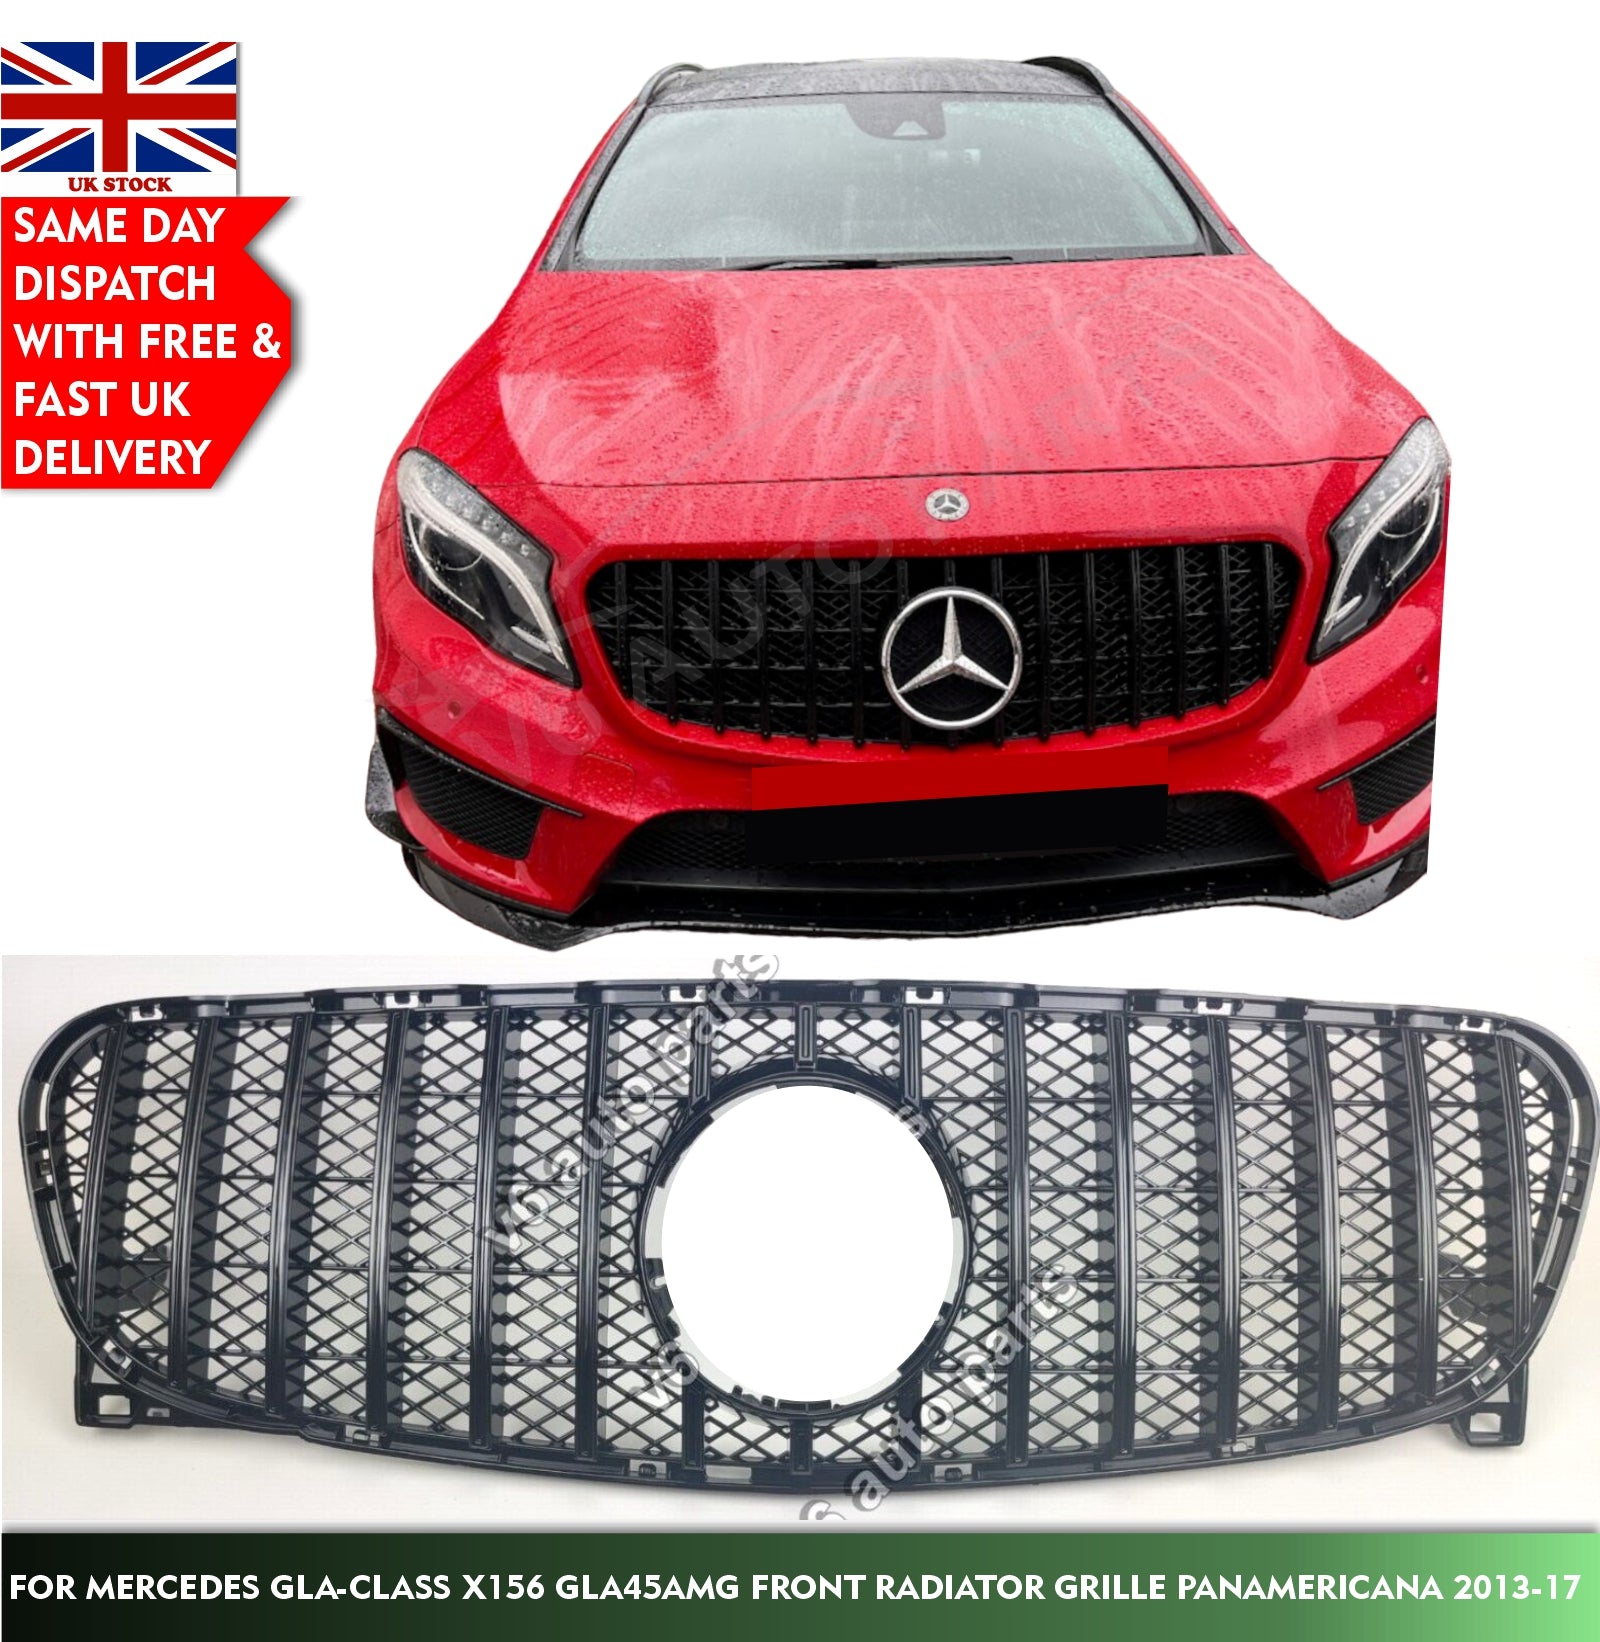 For Mercedes GLA-Class W156 GLA45 Front Radiator GT Black Grille Panamericana 2013-17